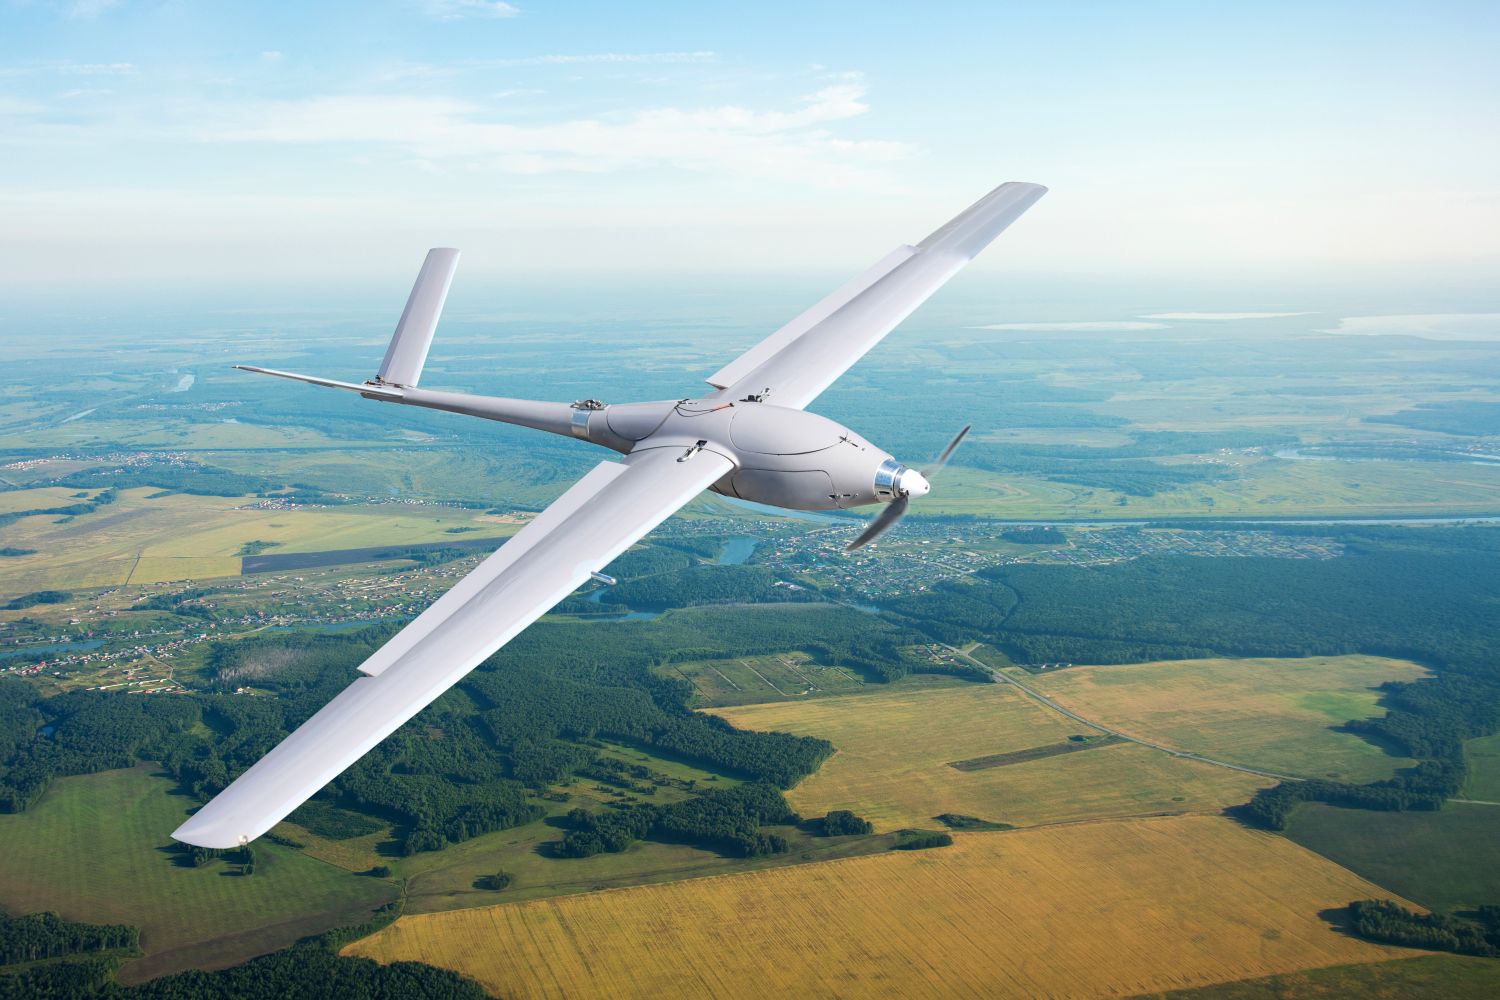 B.Sc. in Unmanned Aircraft Systems Design and Integration